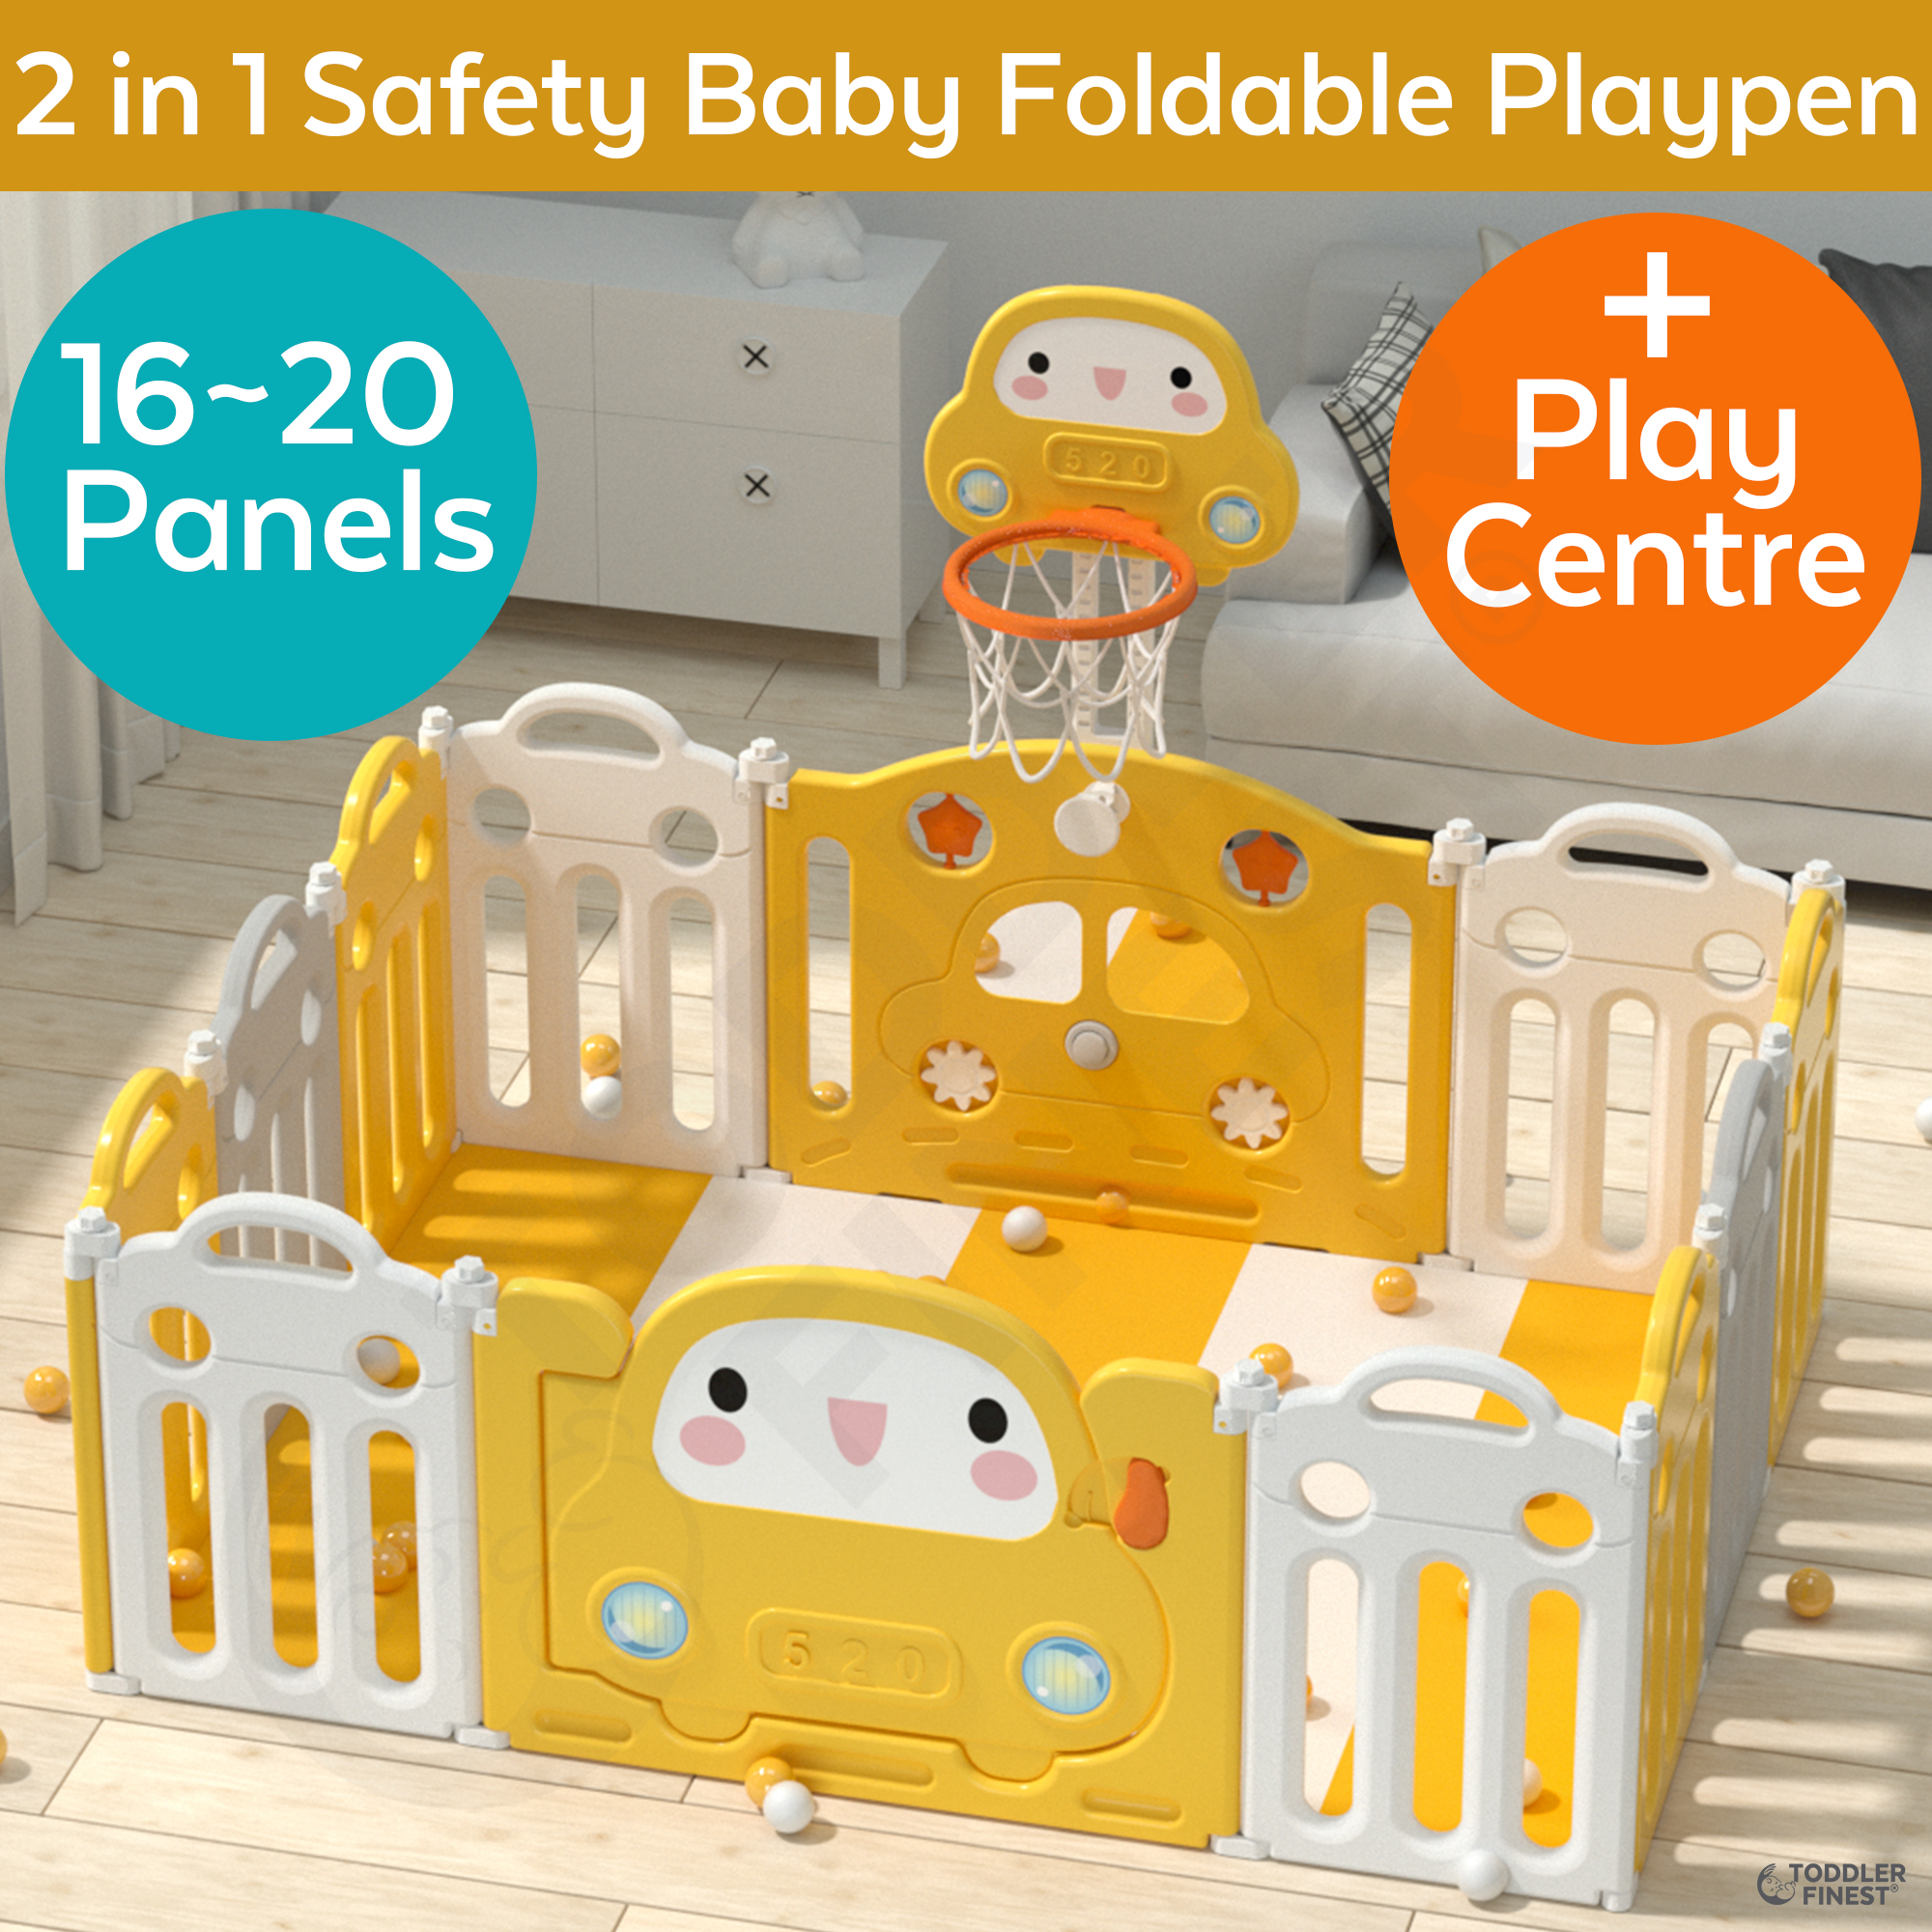 14 Panel Kidsclub Baby Play Yards Foldable Safety Play Center Baby Playpen Home Indoor Outdoor Pen HDPE Material and BPA Free Baby Fence Infant Play Pin for 3M-6Y 